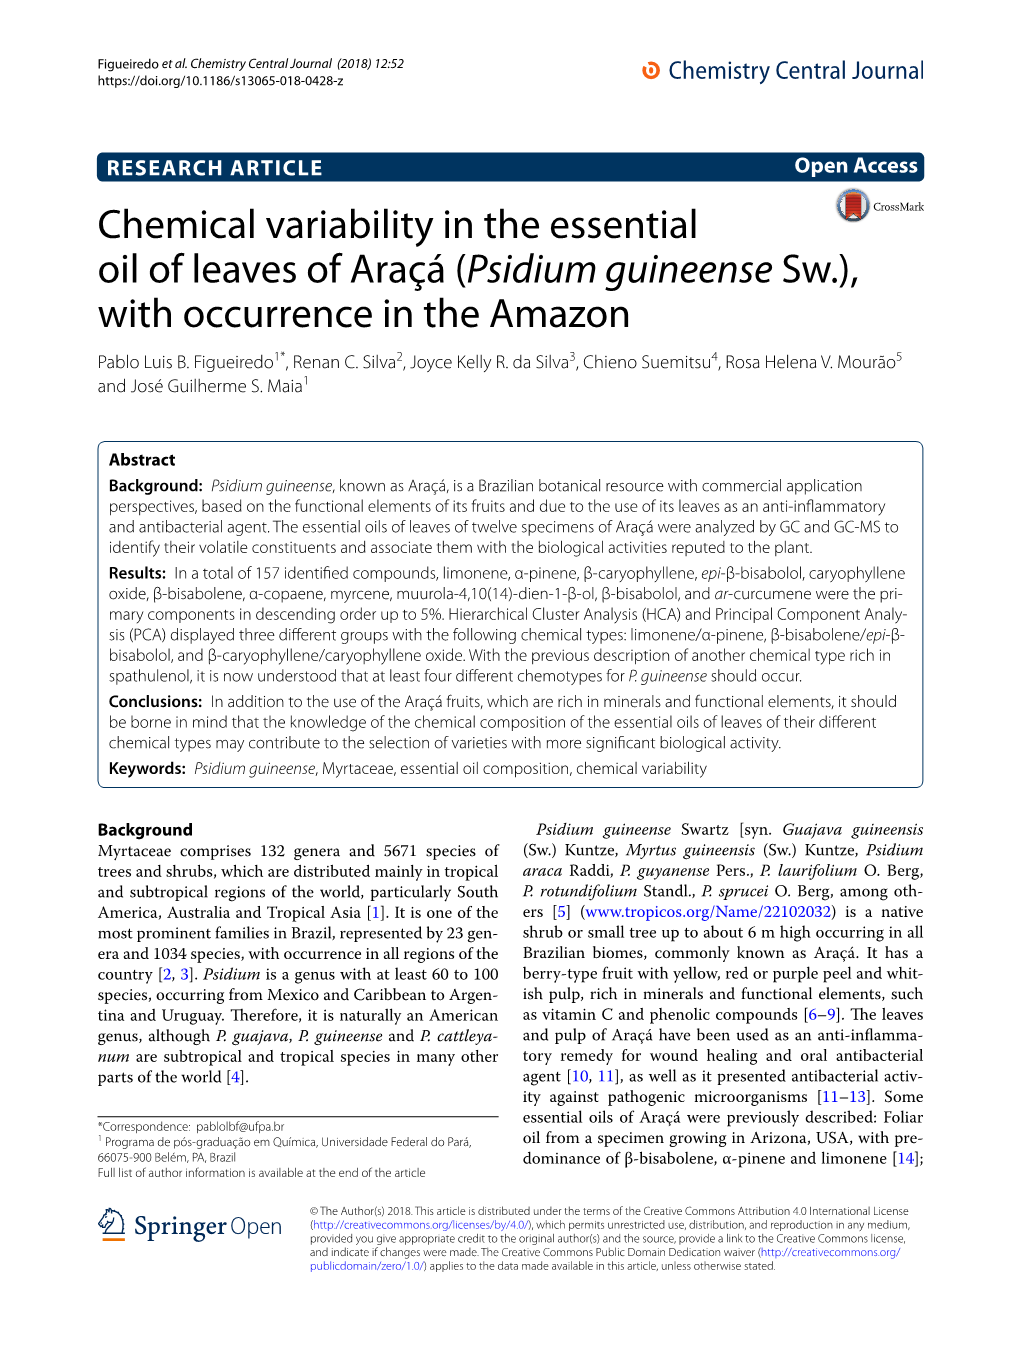 Chemical Variability in the Essential Oil of Leaves of Araçá (Psidium Guineense Sw.), with Occurrence in the Amazon Pablo Luis B